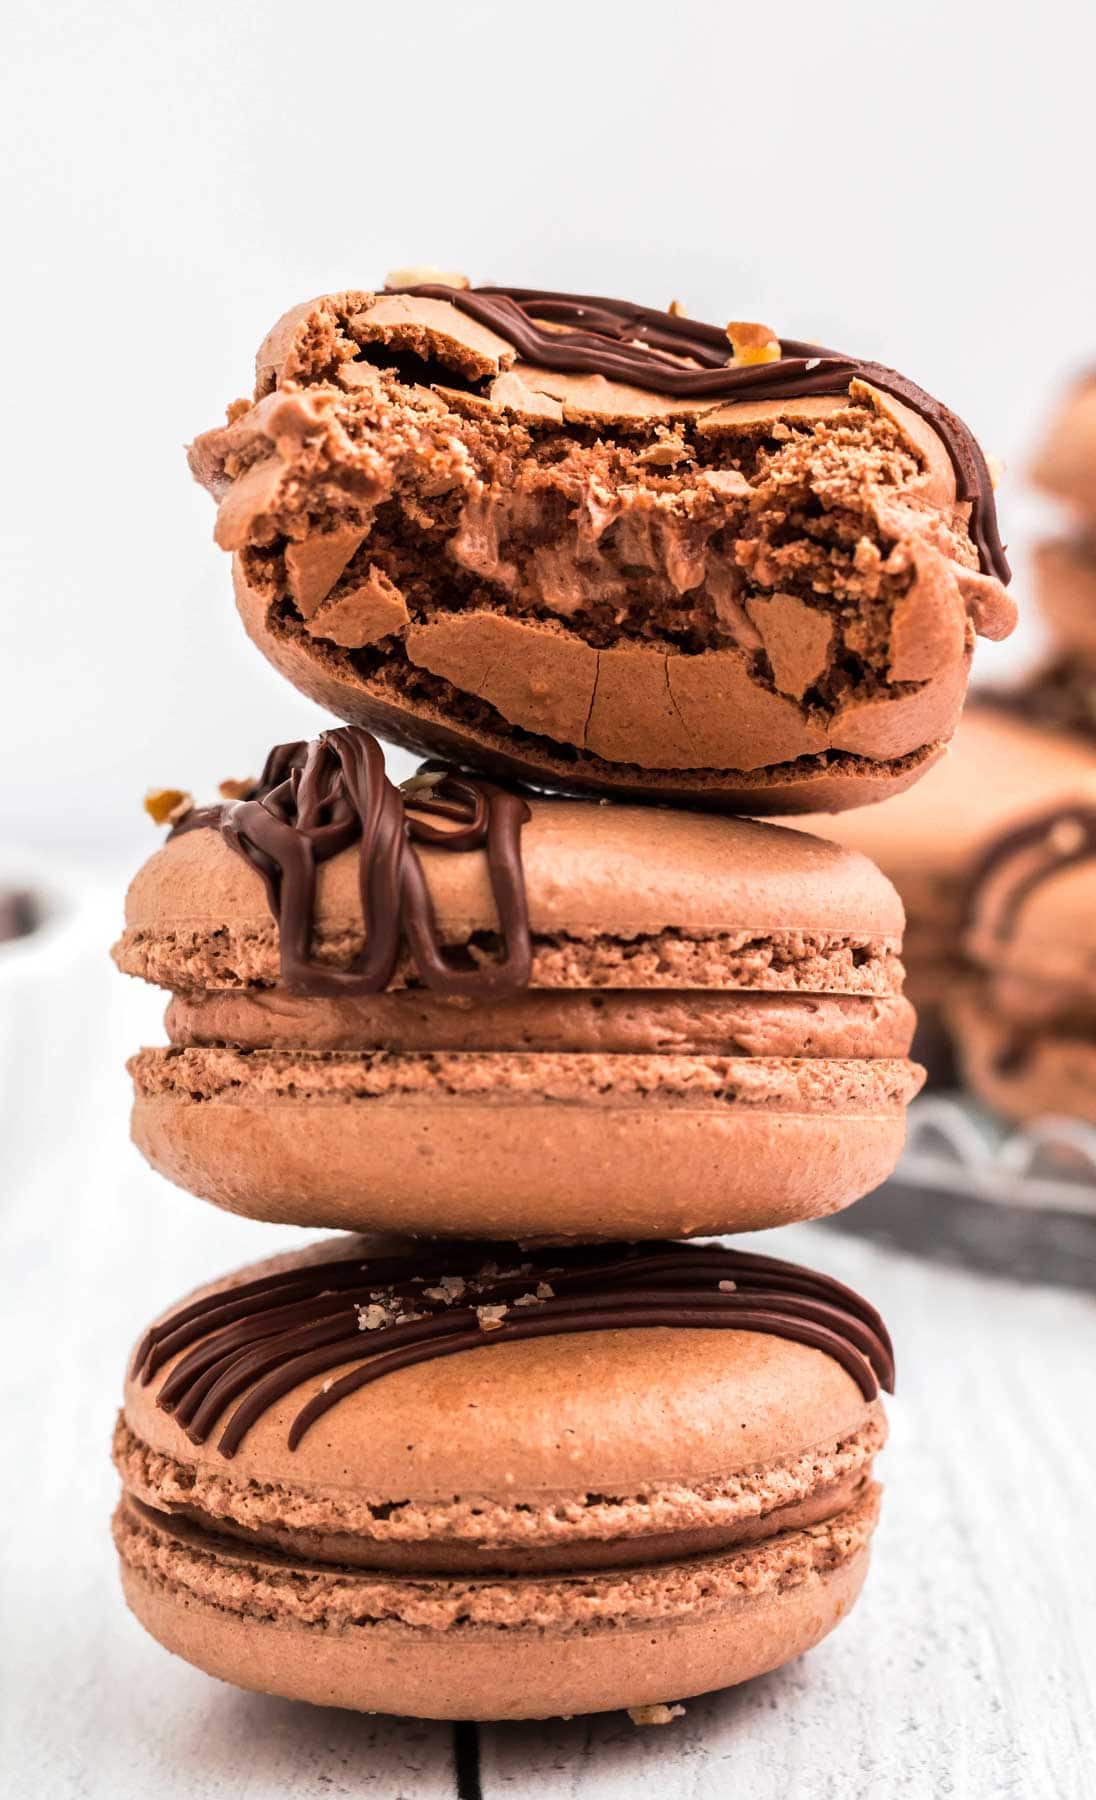 3 stacked chocolate macarons, and the top one is half eaten.